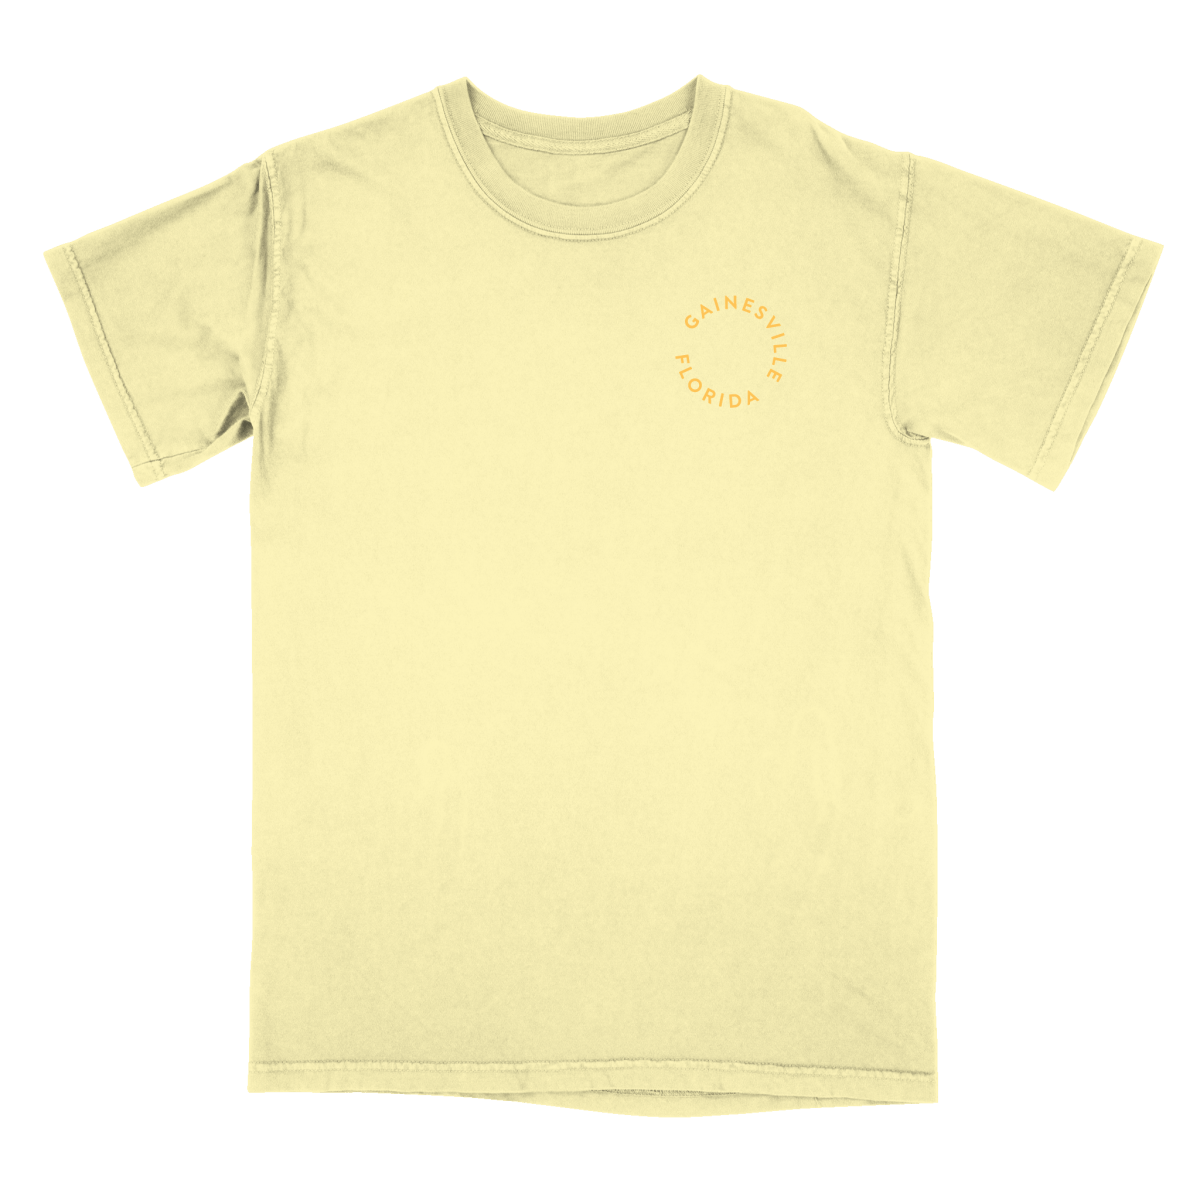 Gainesville Cities in a Circle T - Shirt - Shop B - Unlimited - men tee